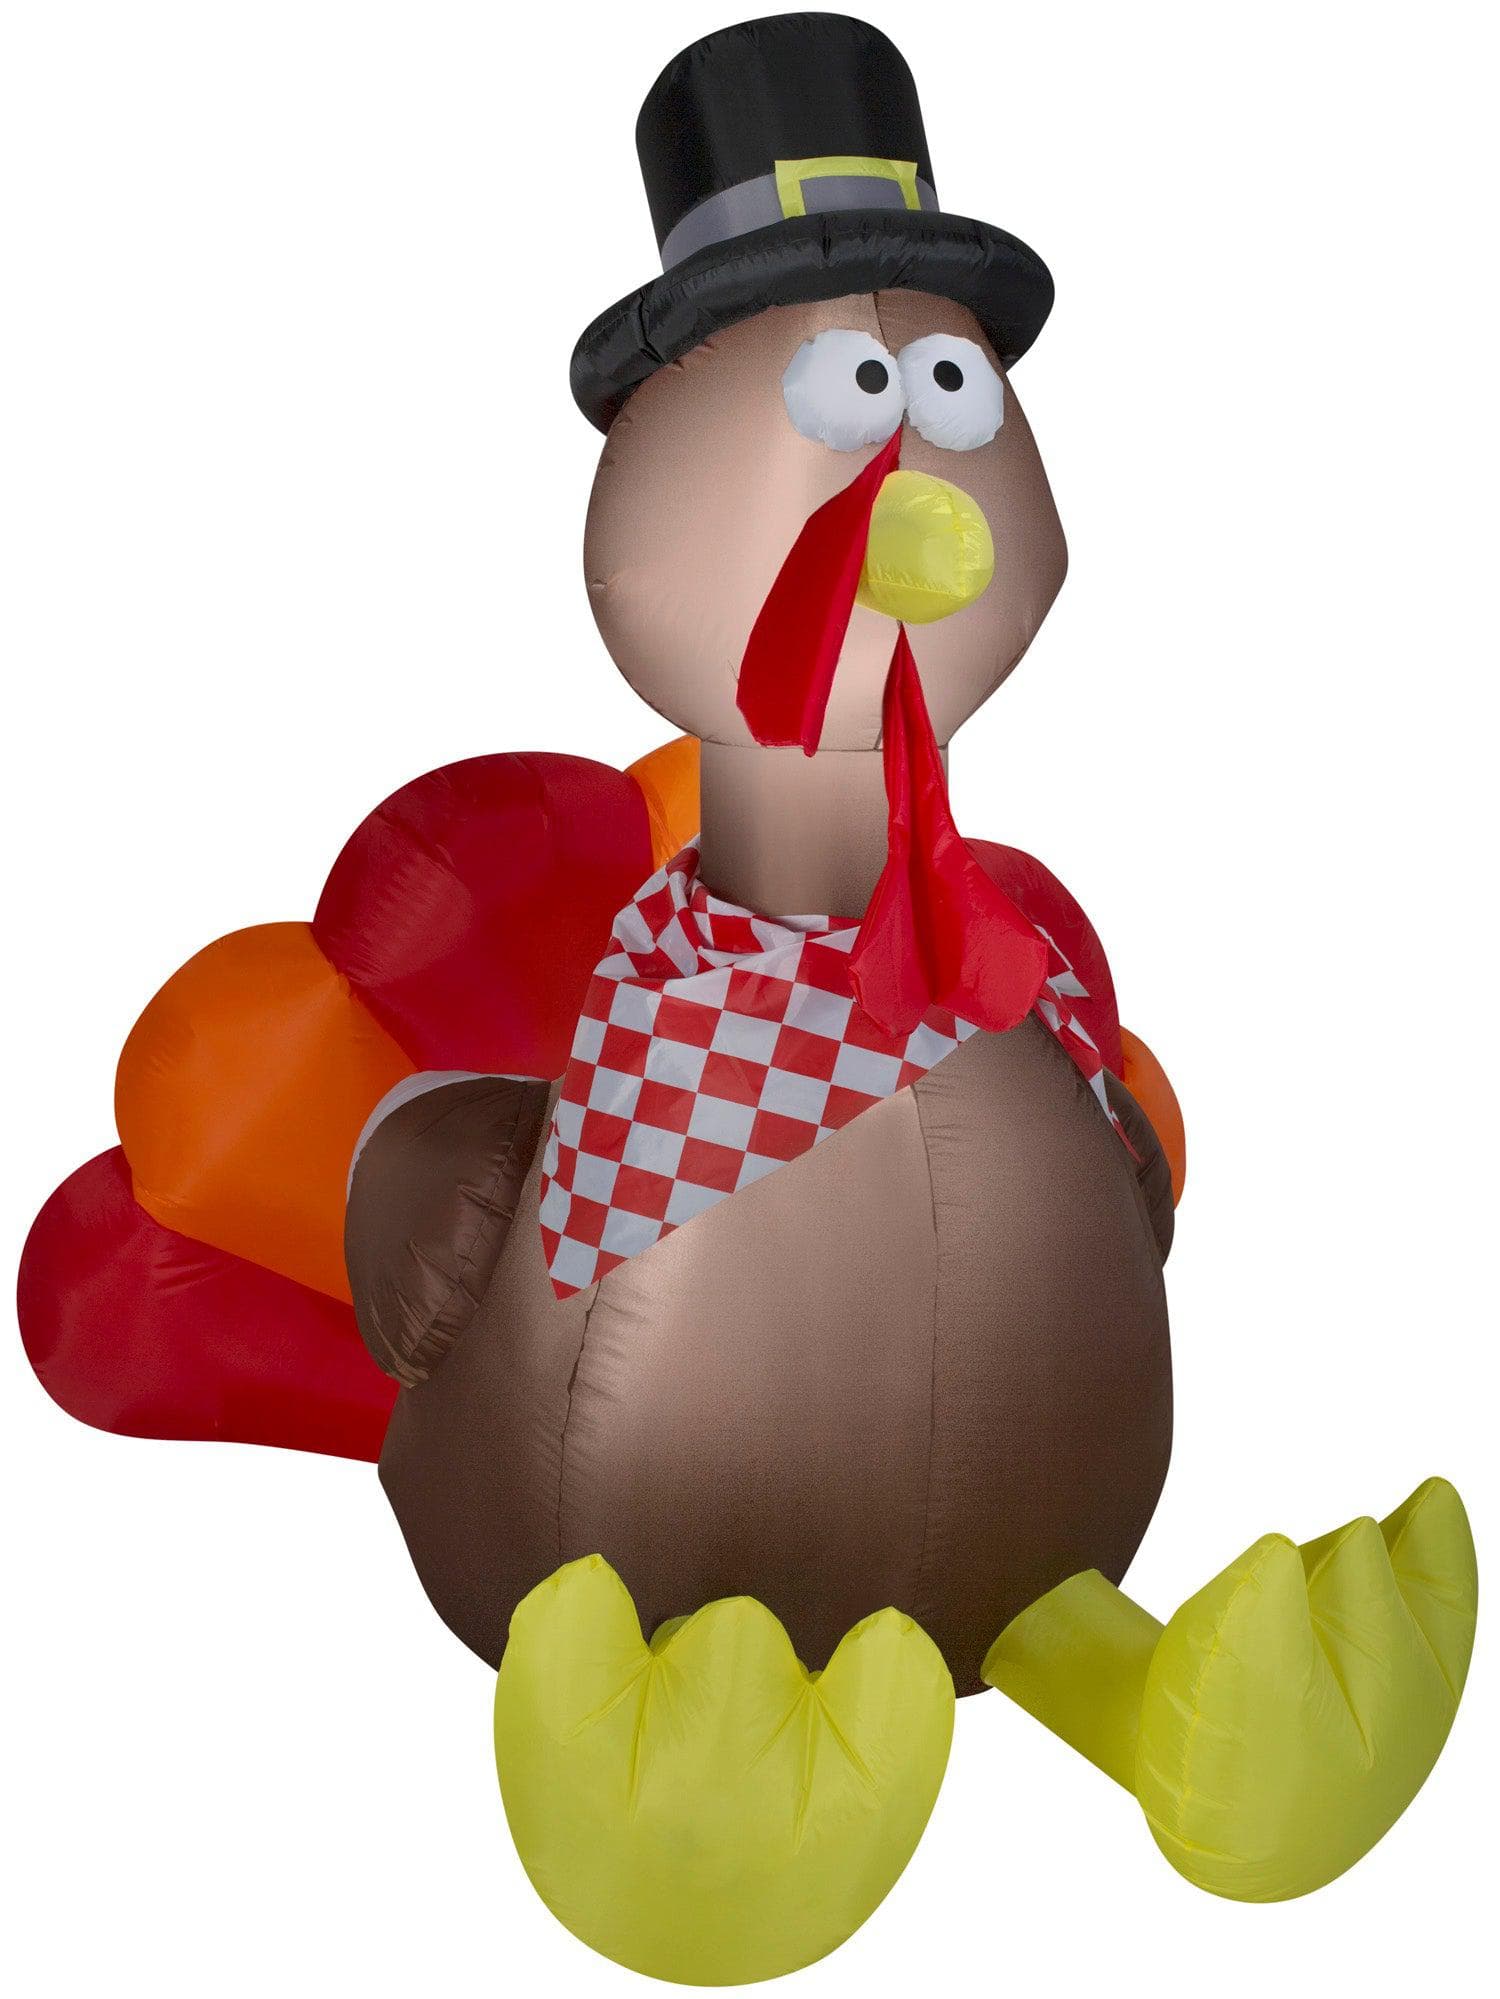 6 Foot Thankful Turkey Light Up Thanksgiving Inflatable Lawn Decor - costumes.com